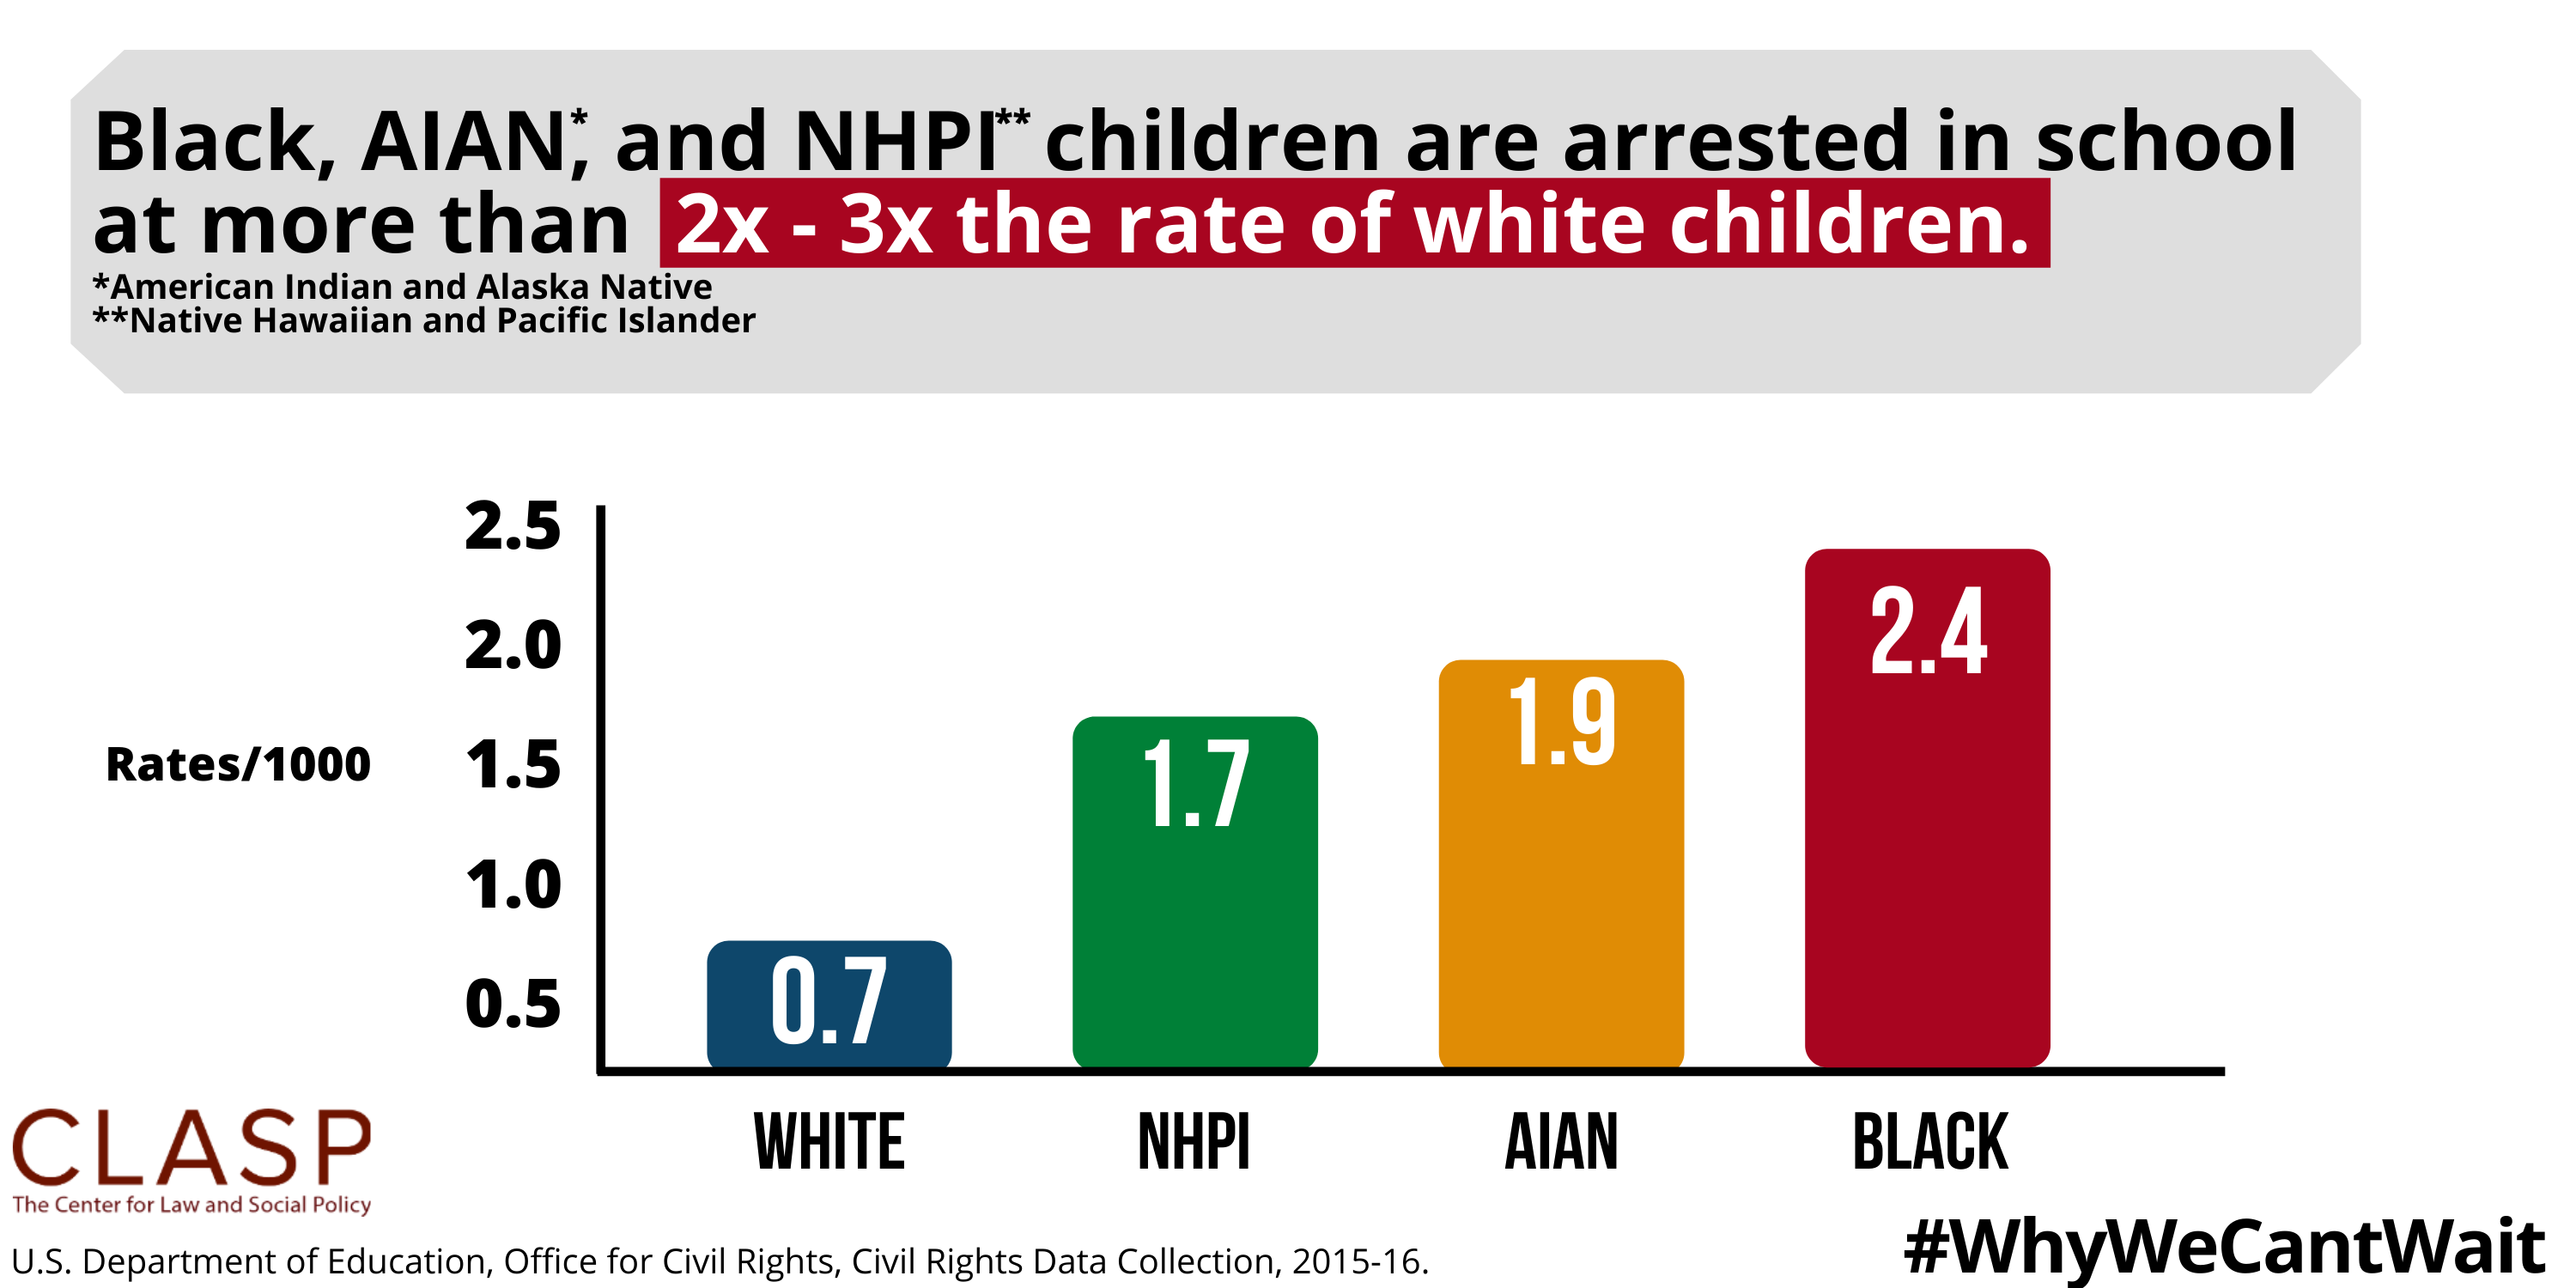 Black, AIAN, and NHPI  children are arrested in school at more than  3x the rate of white children.